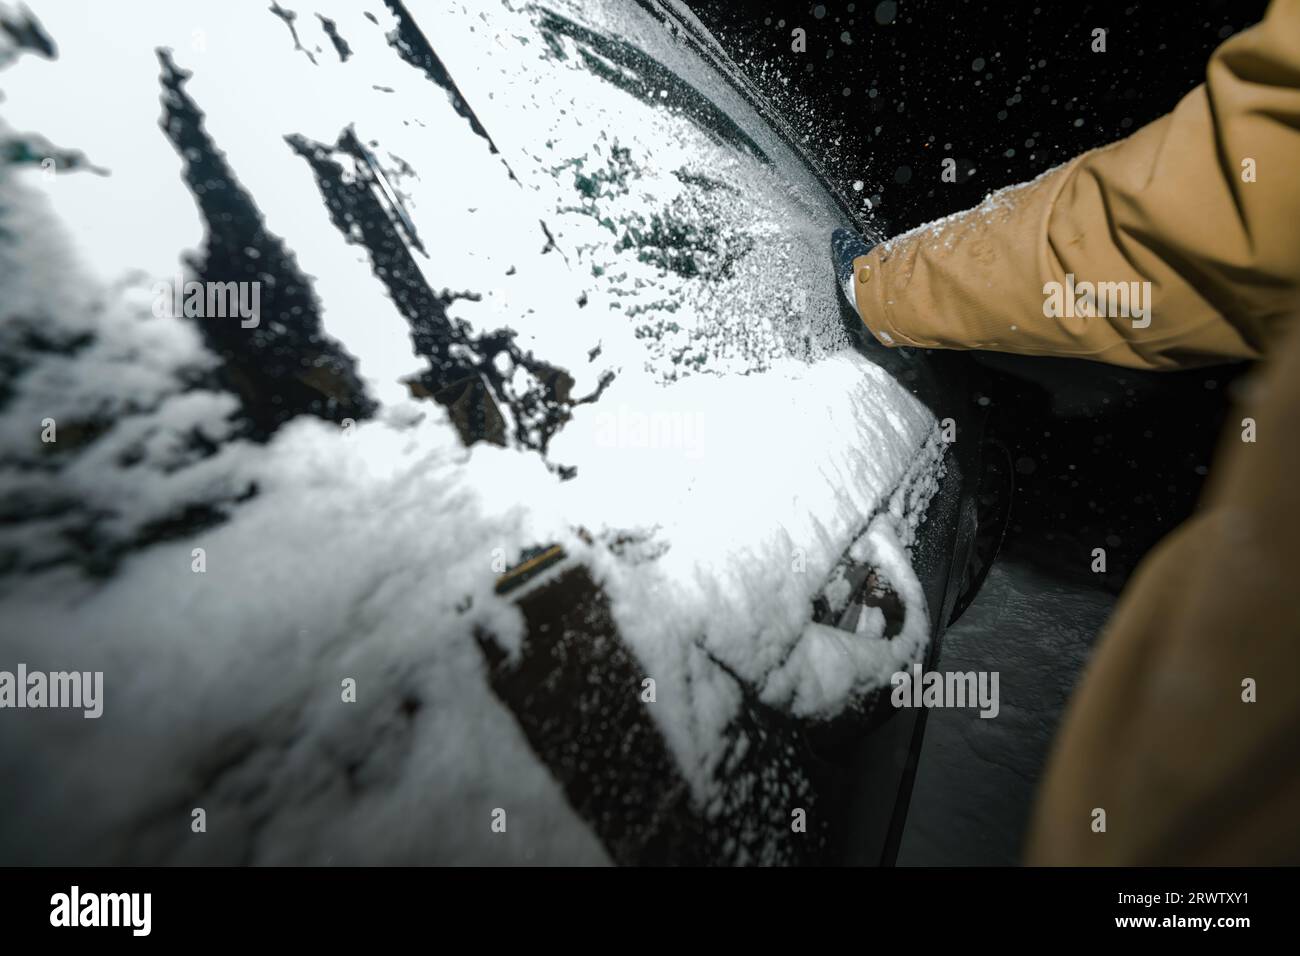 Captured against the night's darkness, a male hand in a glove carefully removes snow from the frozen windows of a car following a severe tempest Stock Photo